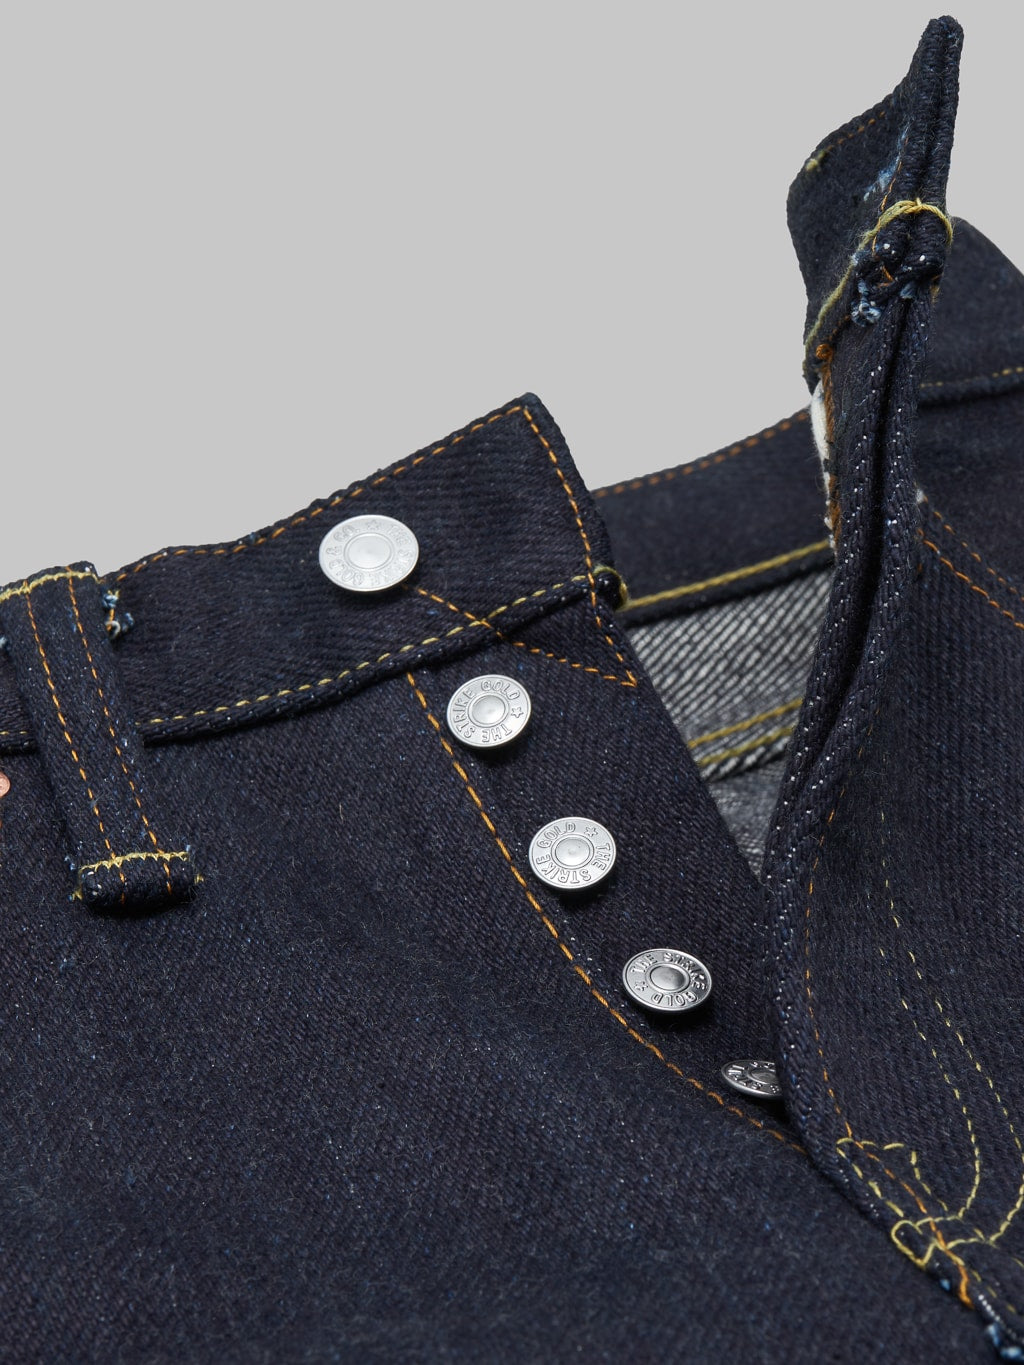 The Strike Gold Extra Heavyweight straight tapered jeans button details